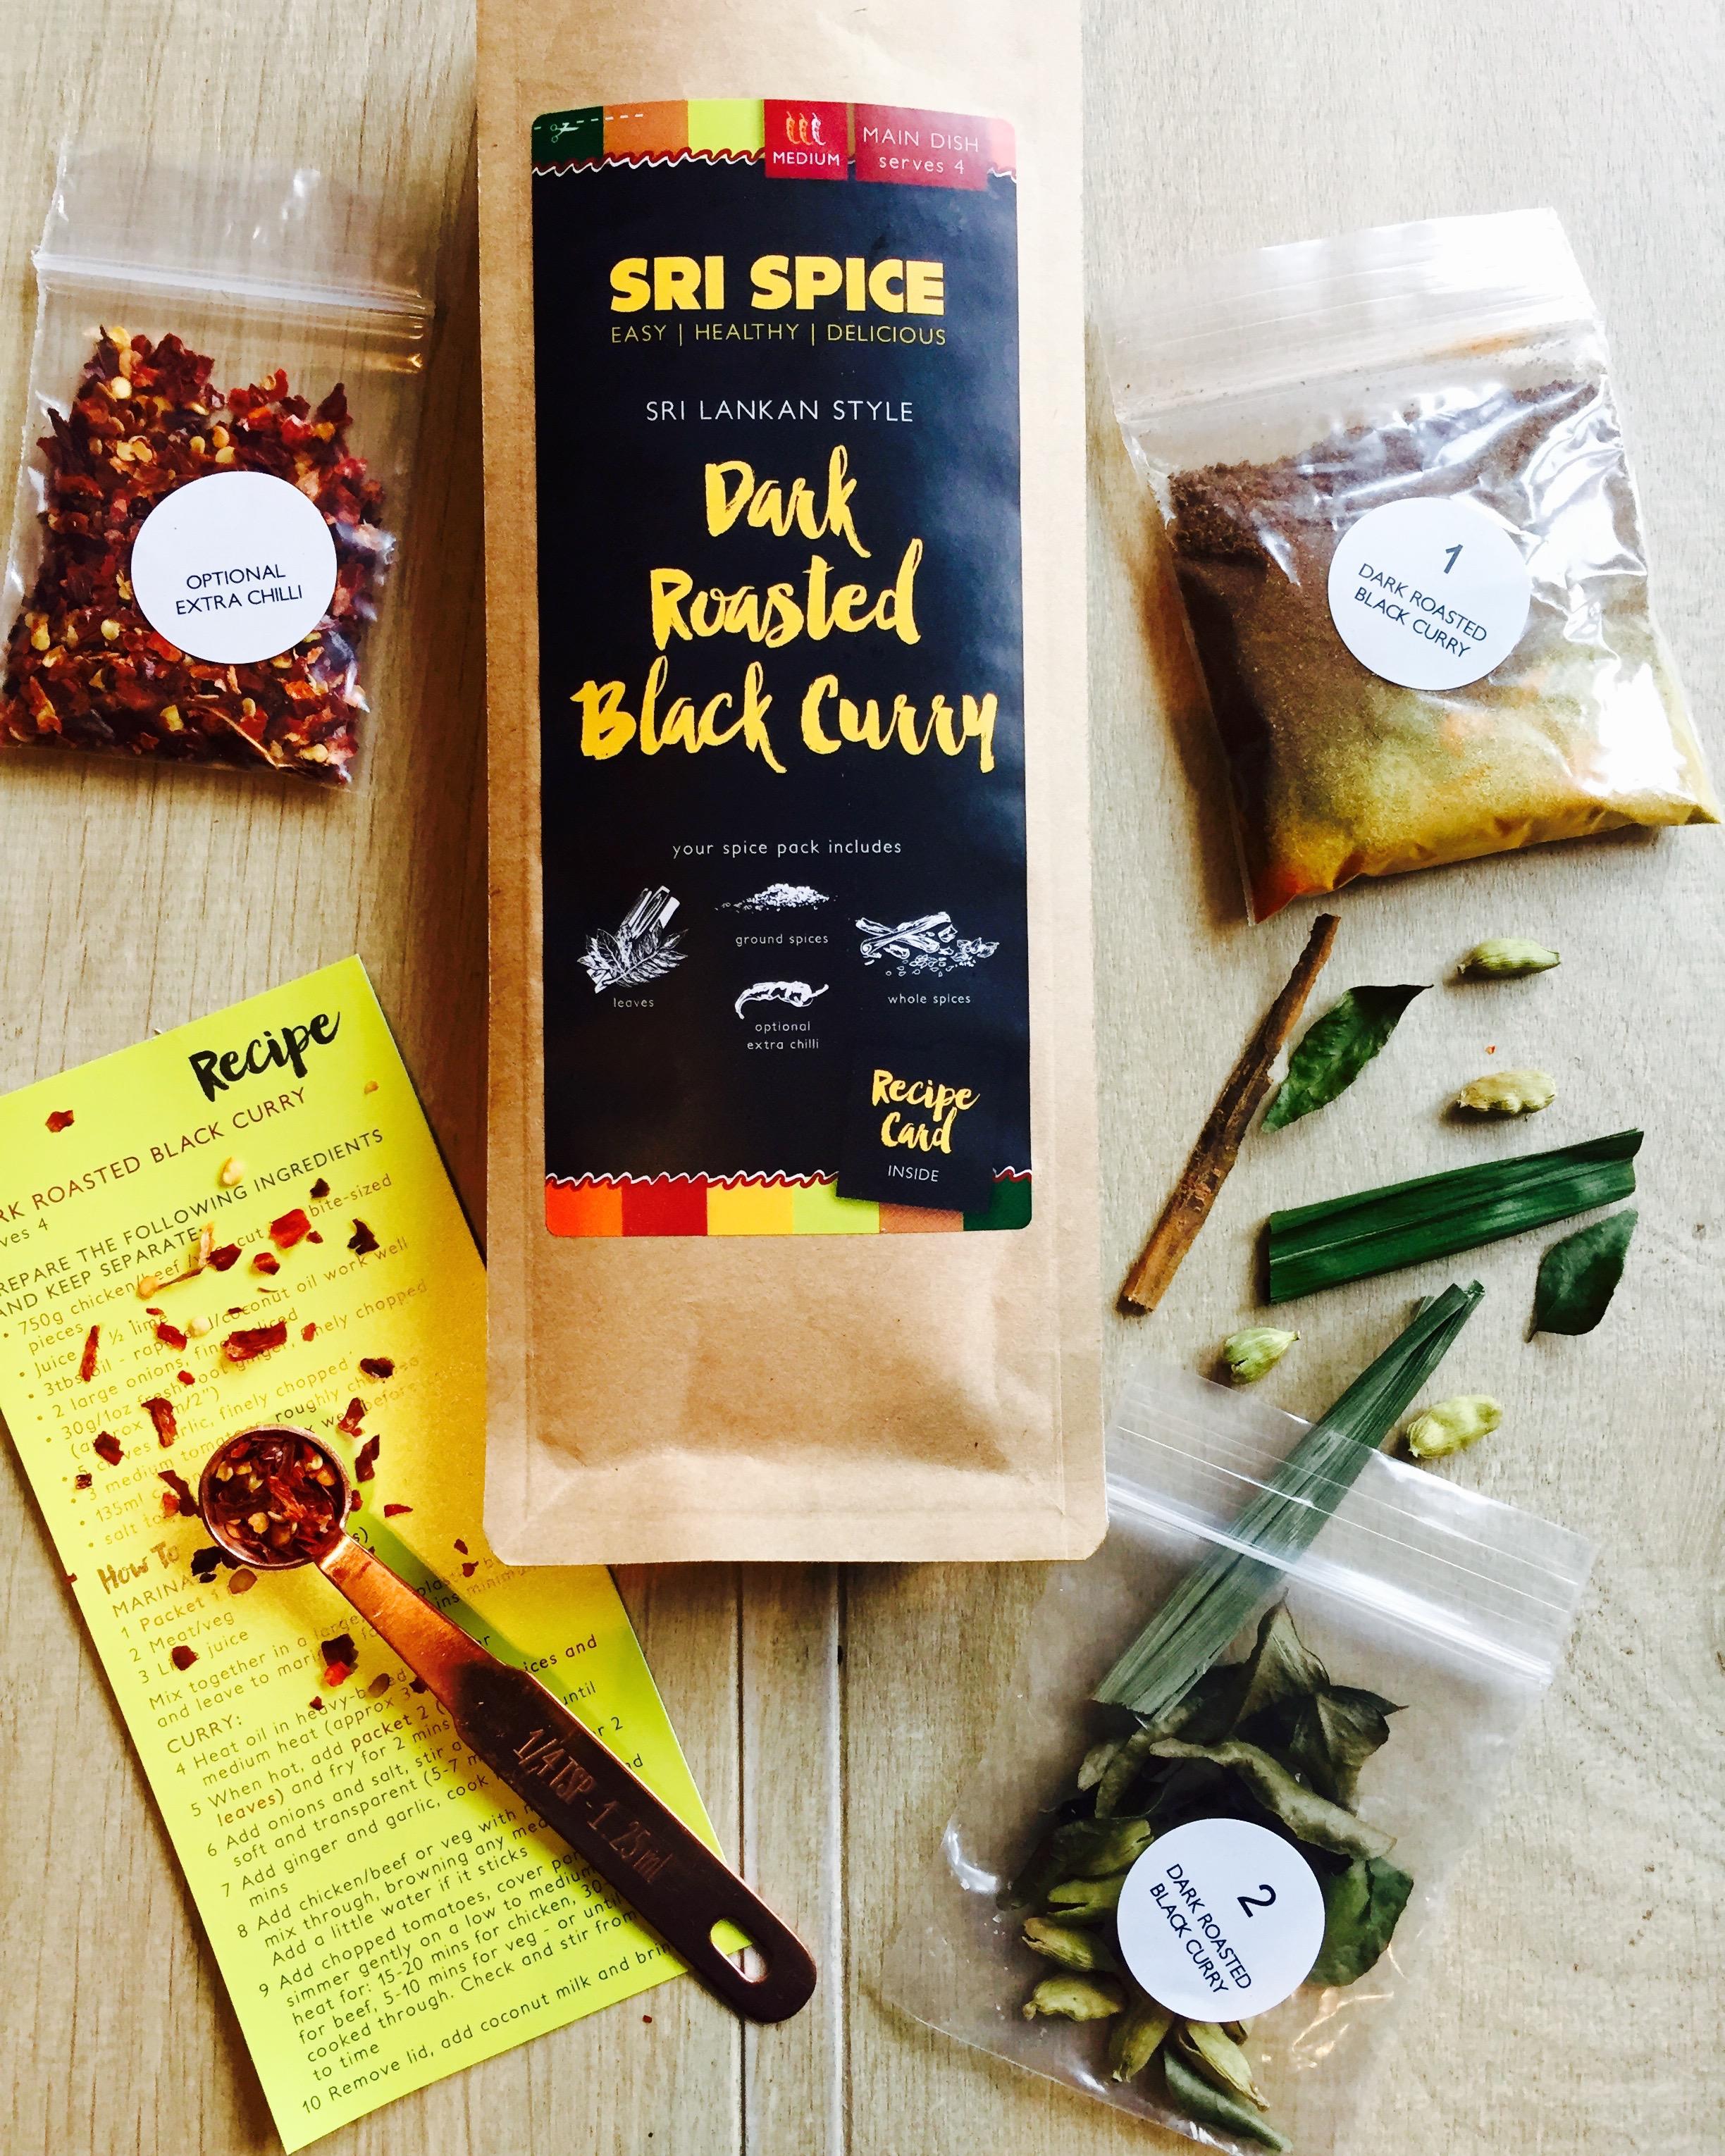 Dark Roasted Black Curry kit ingredients and recipe card